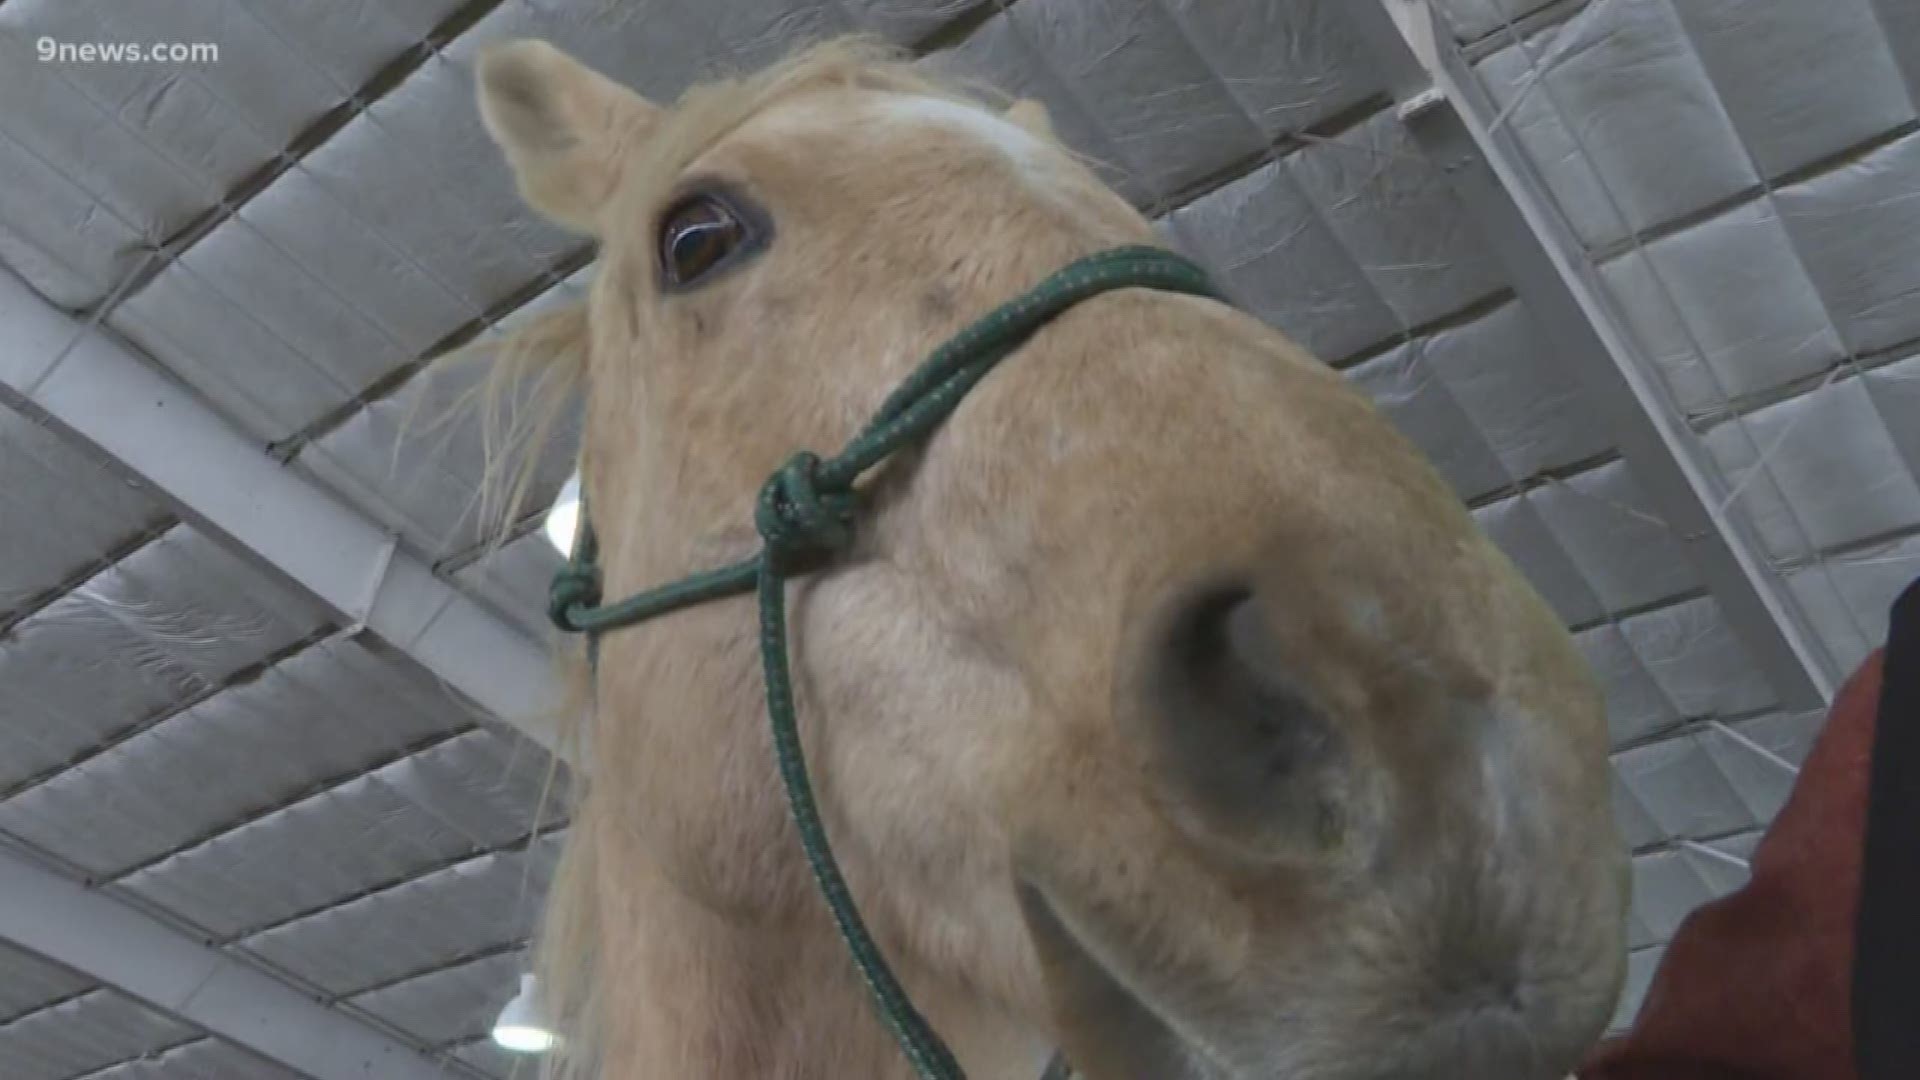 He’s been working through his physical and emotional recovery at the Dumb Friend’s League Harmony Equine Center in Franktown.